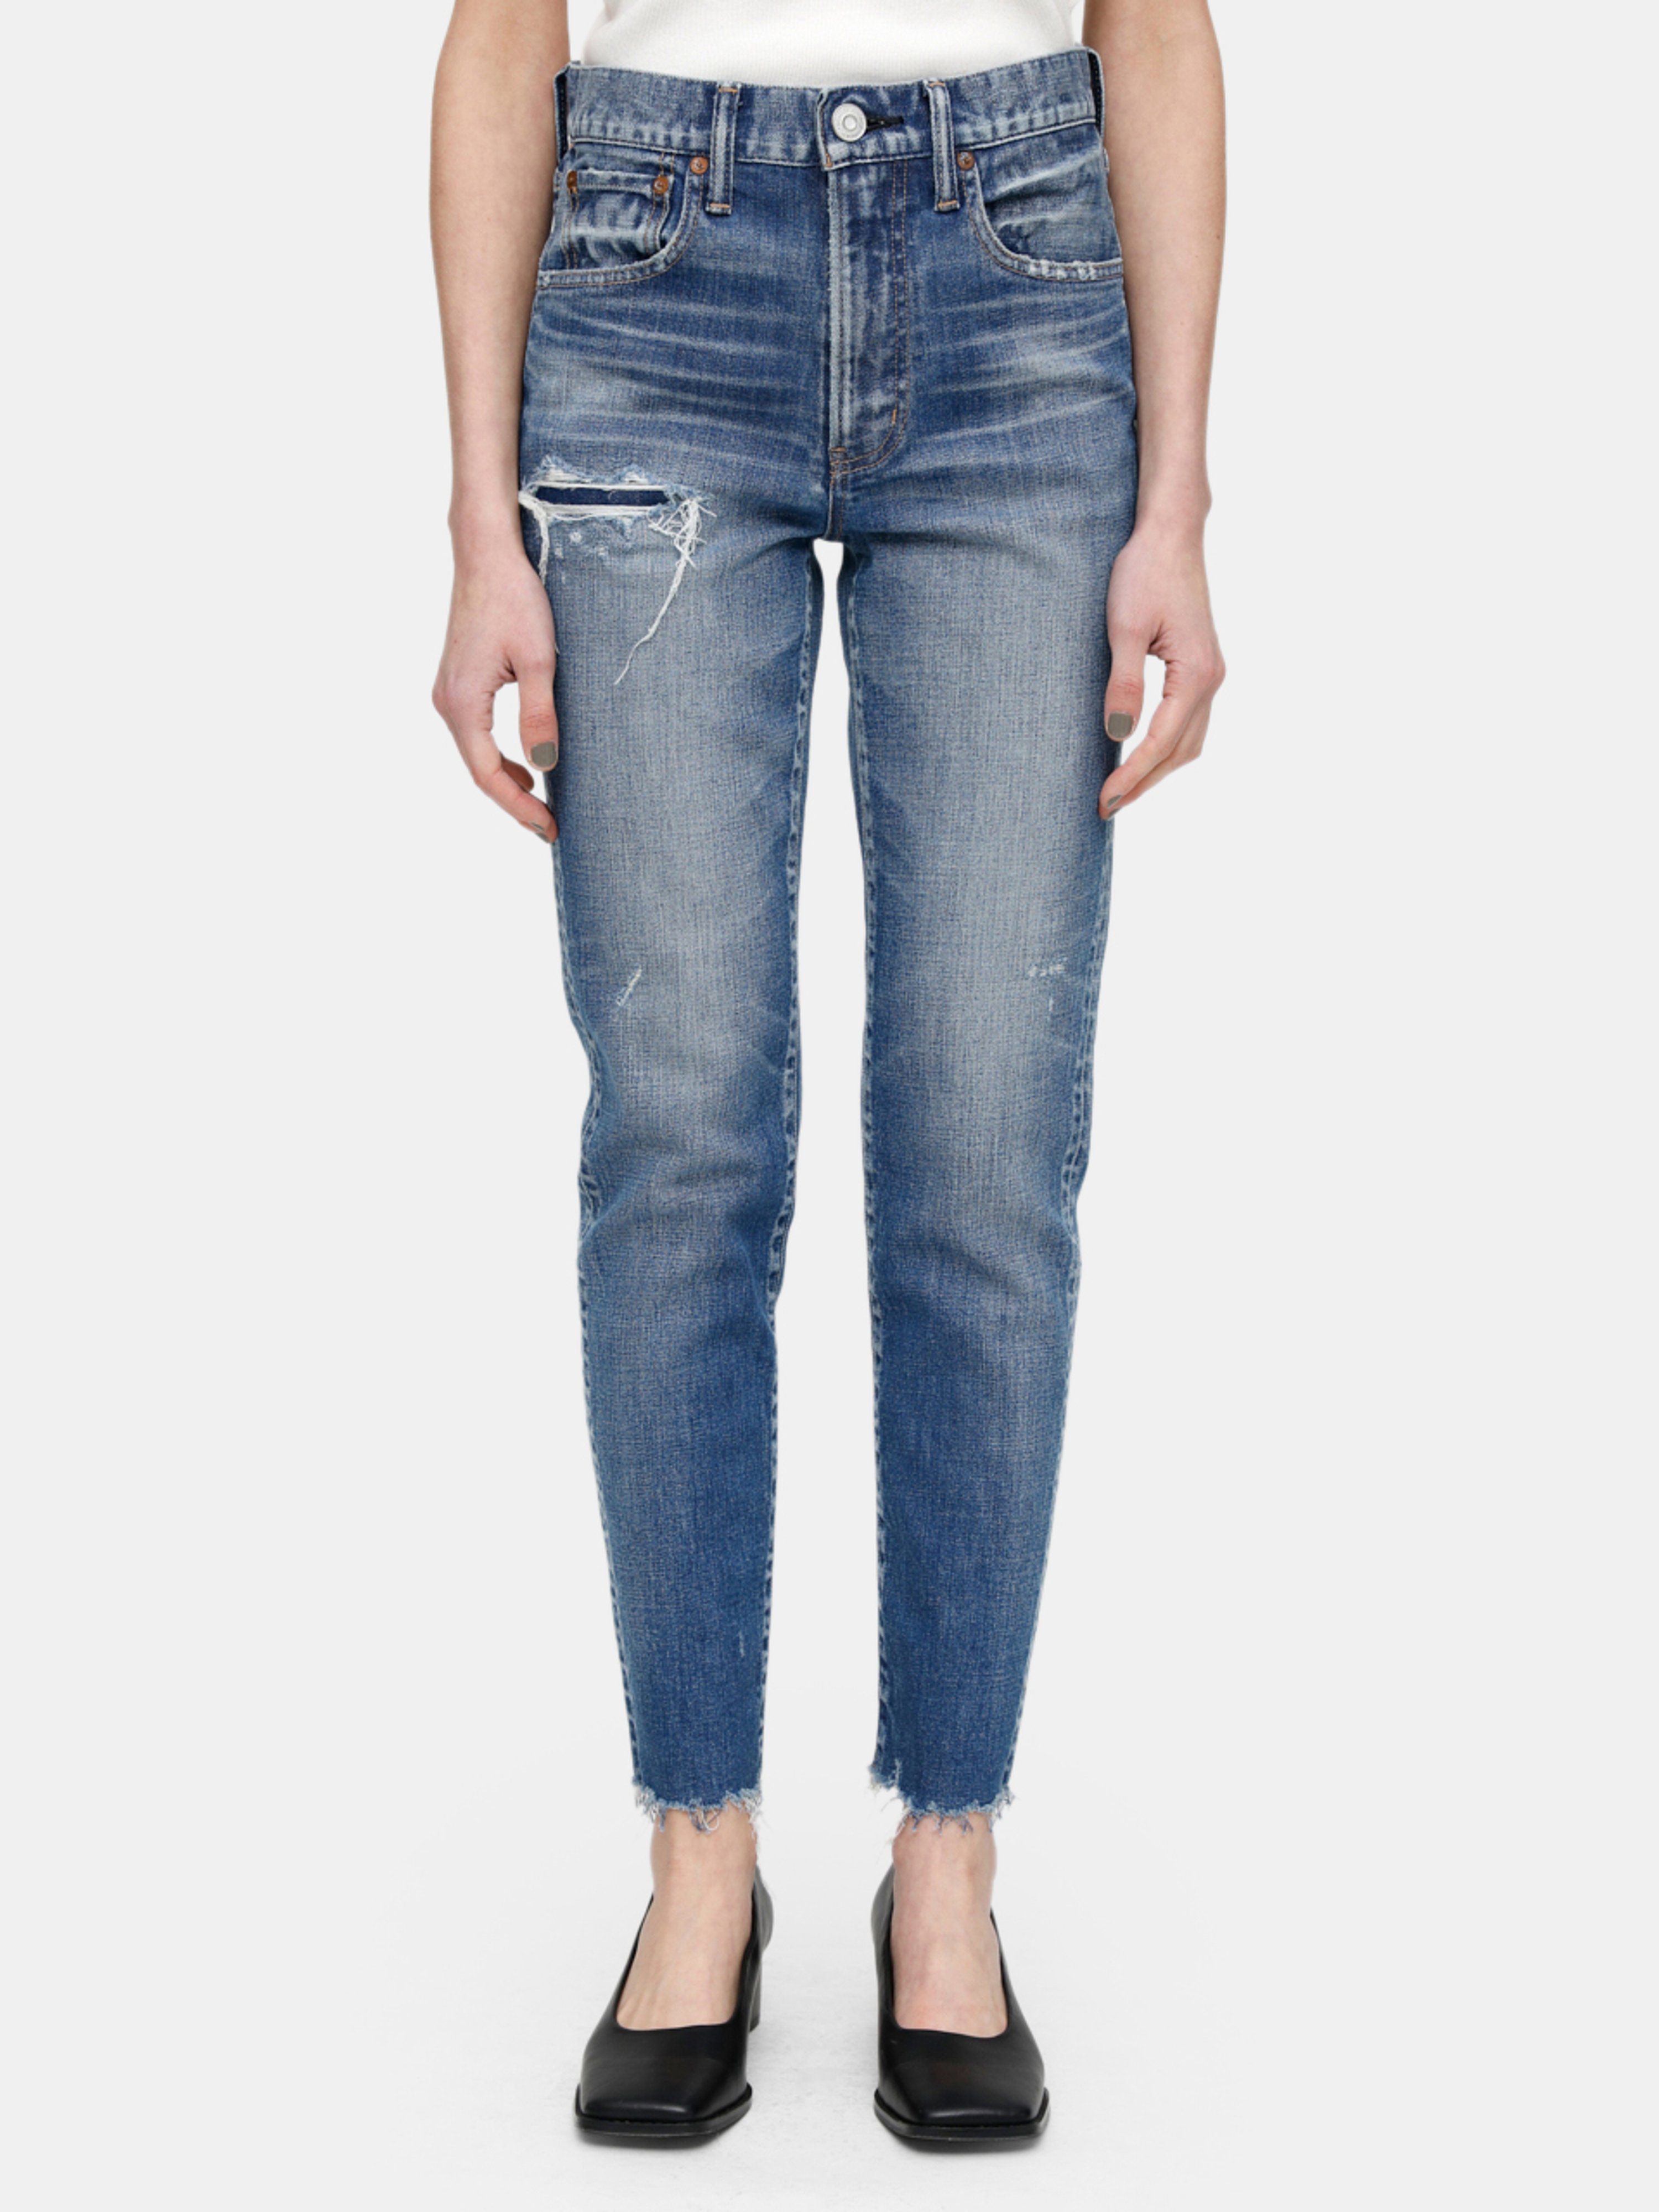 MOUSSY VINTAGE MOUSSY VINTAGE HAMMOND HIGH RISE ANKLE CUT SKINNY JEANS